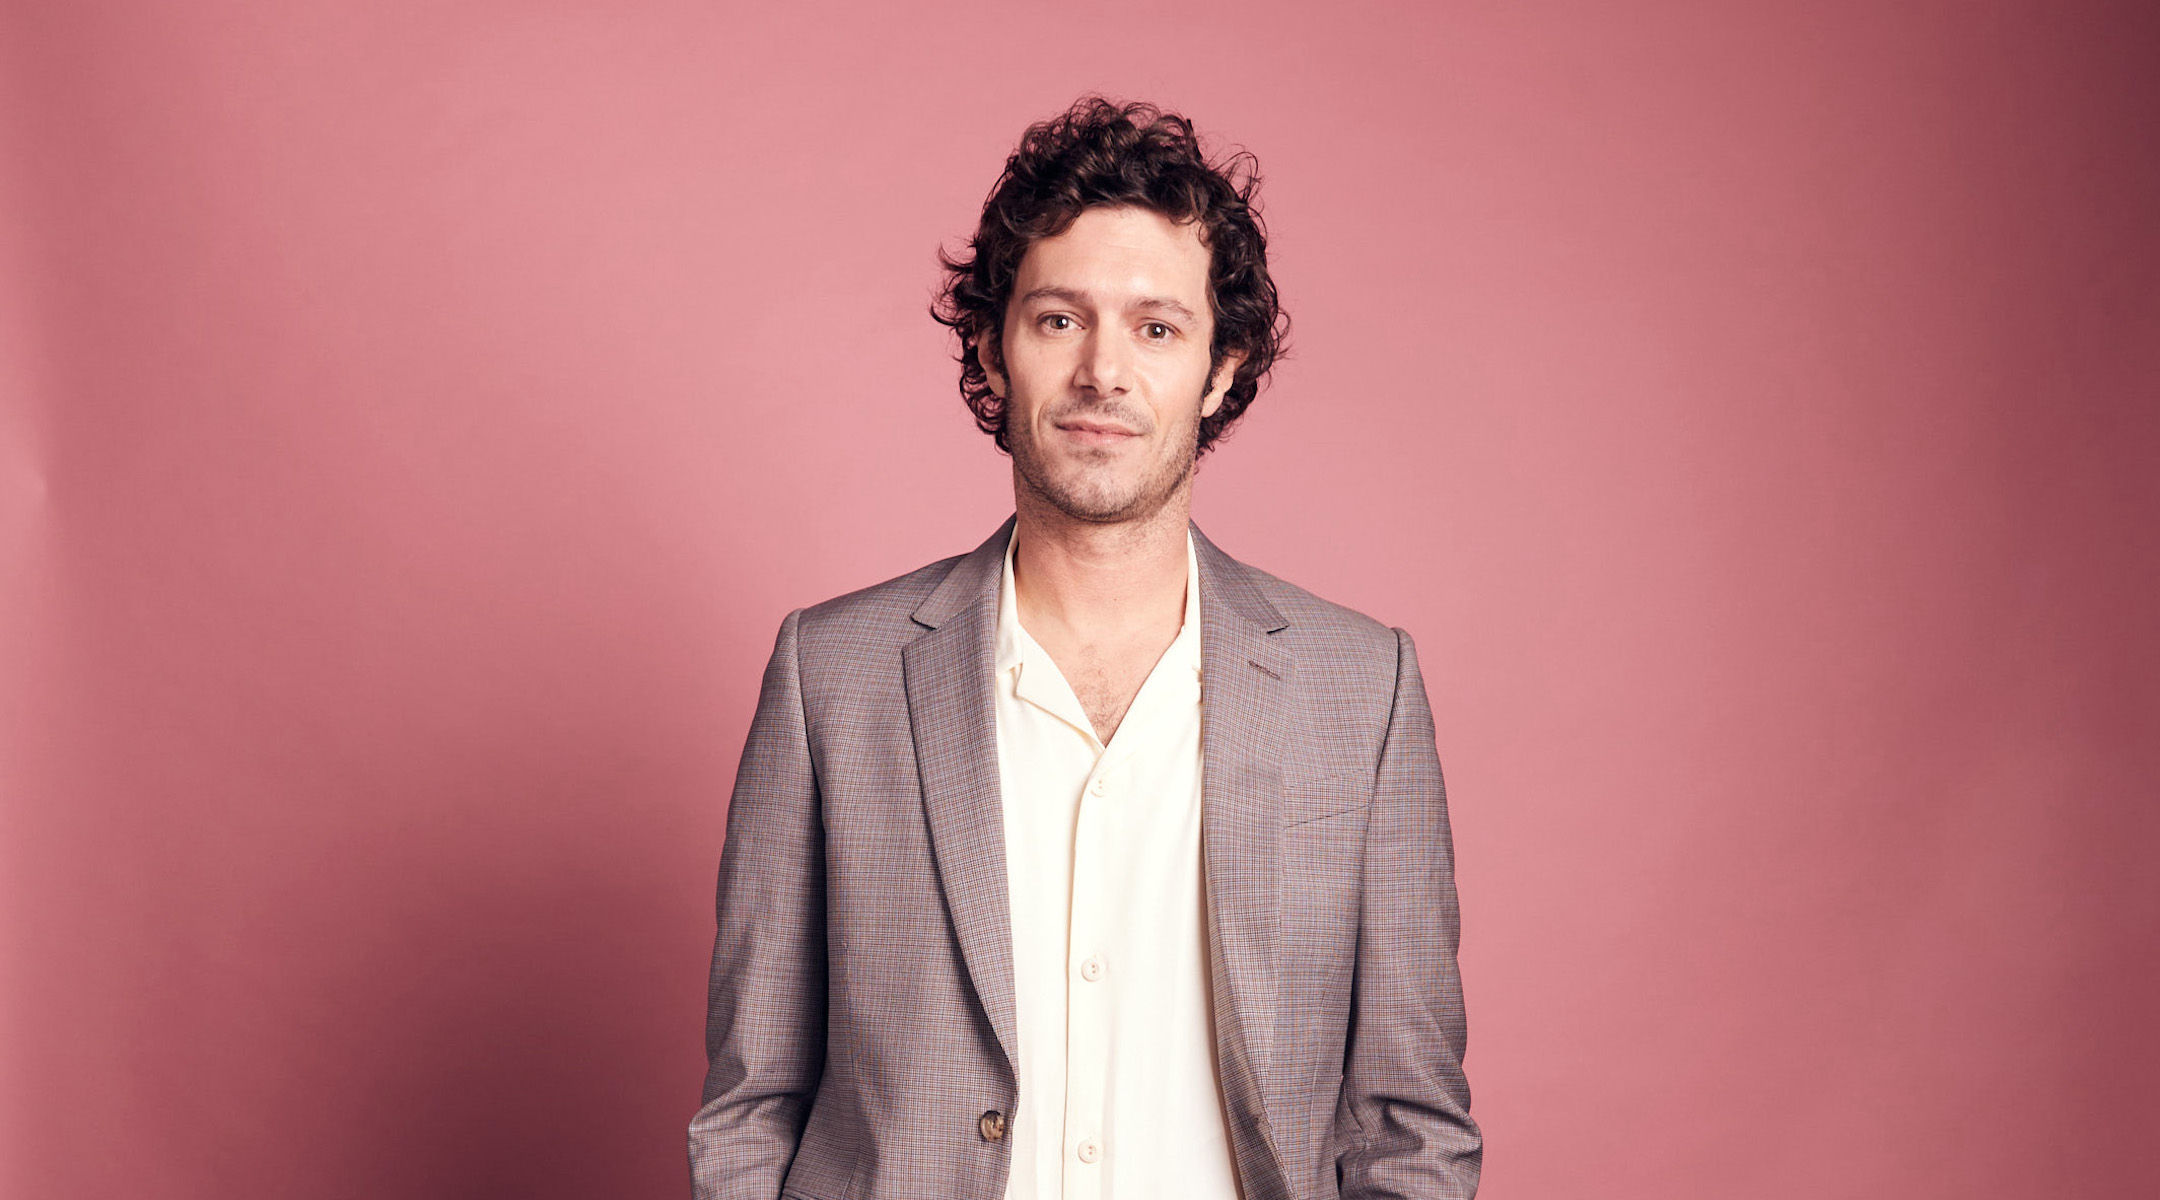 Adam Brody poses in the IMDb Portrait Studio at the 2023 Independent Spirit Awards in Santa Monica, Calif., March 4, 2023. (Michael Rowe/Getty Images for IMDb)